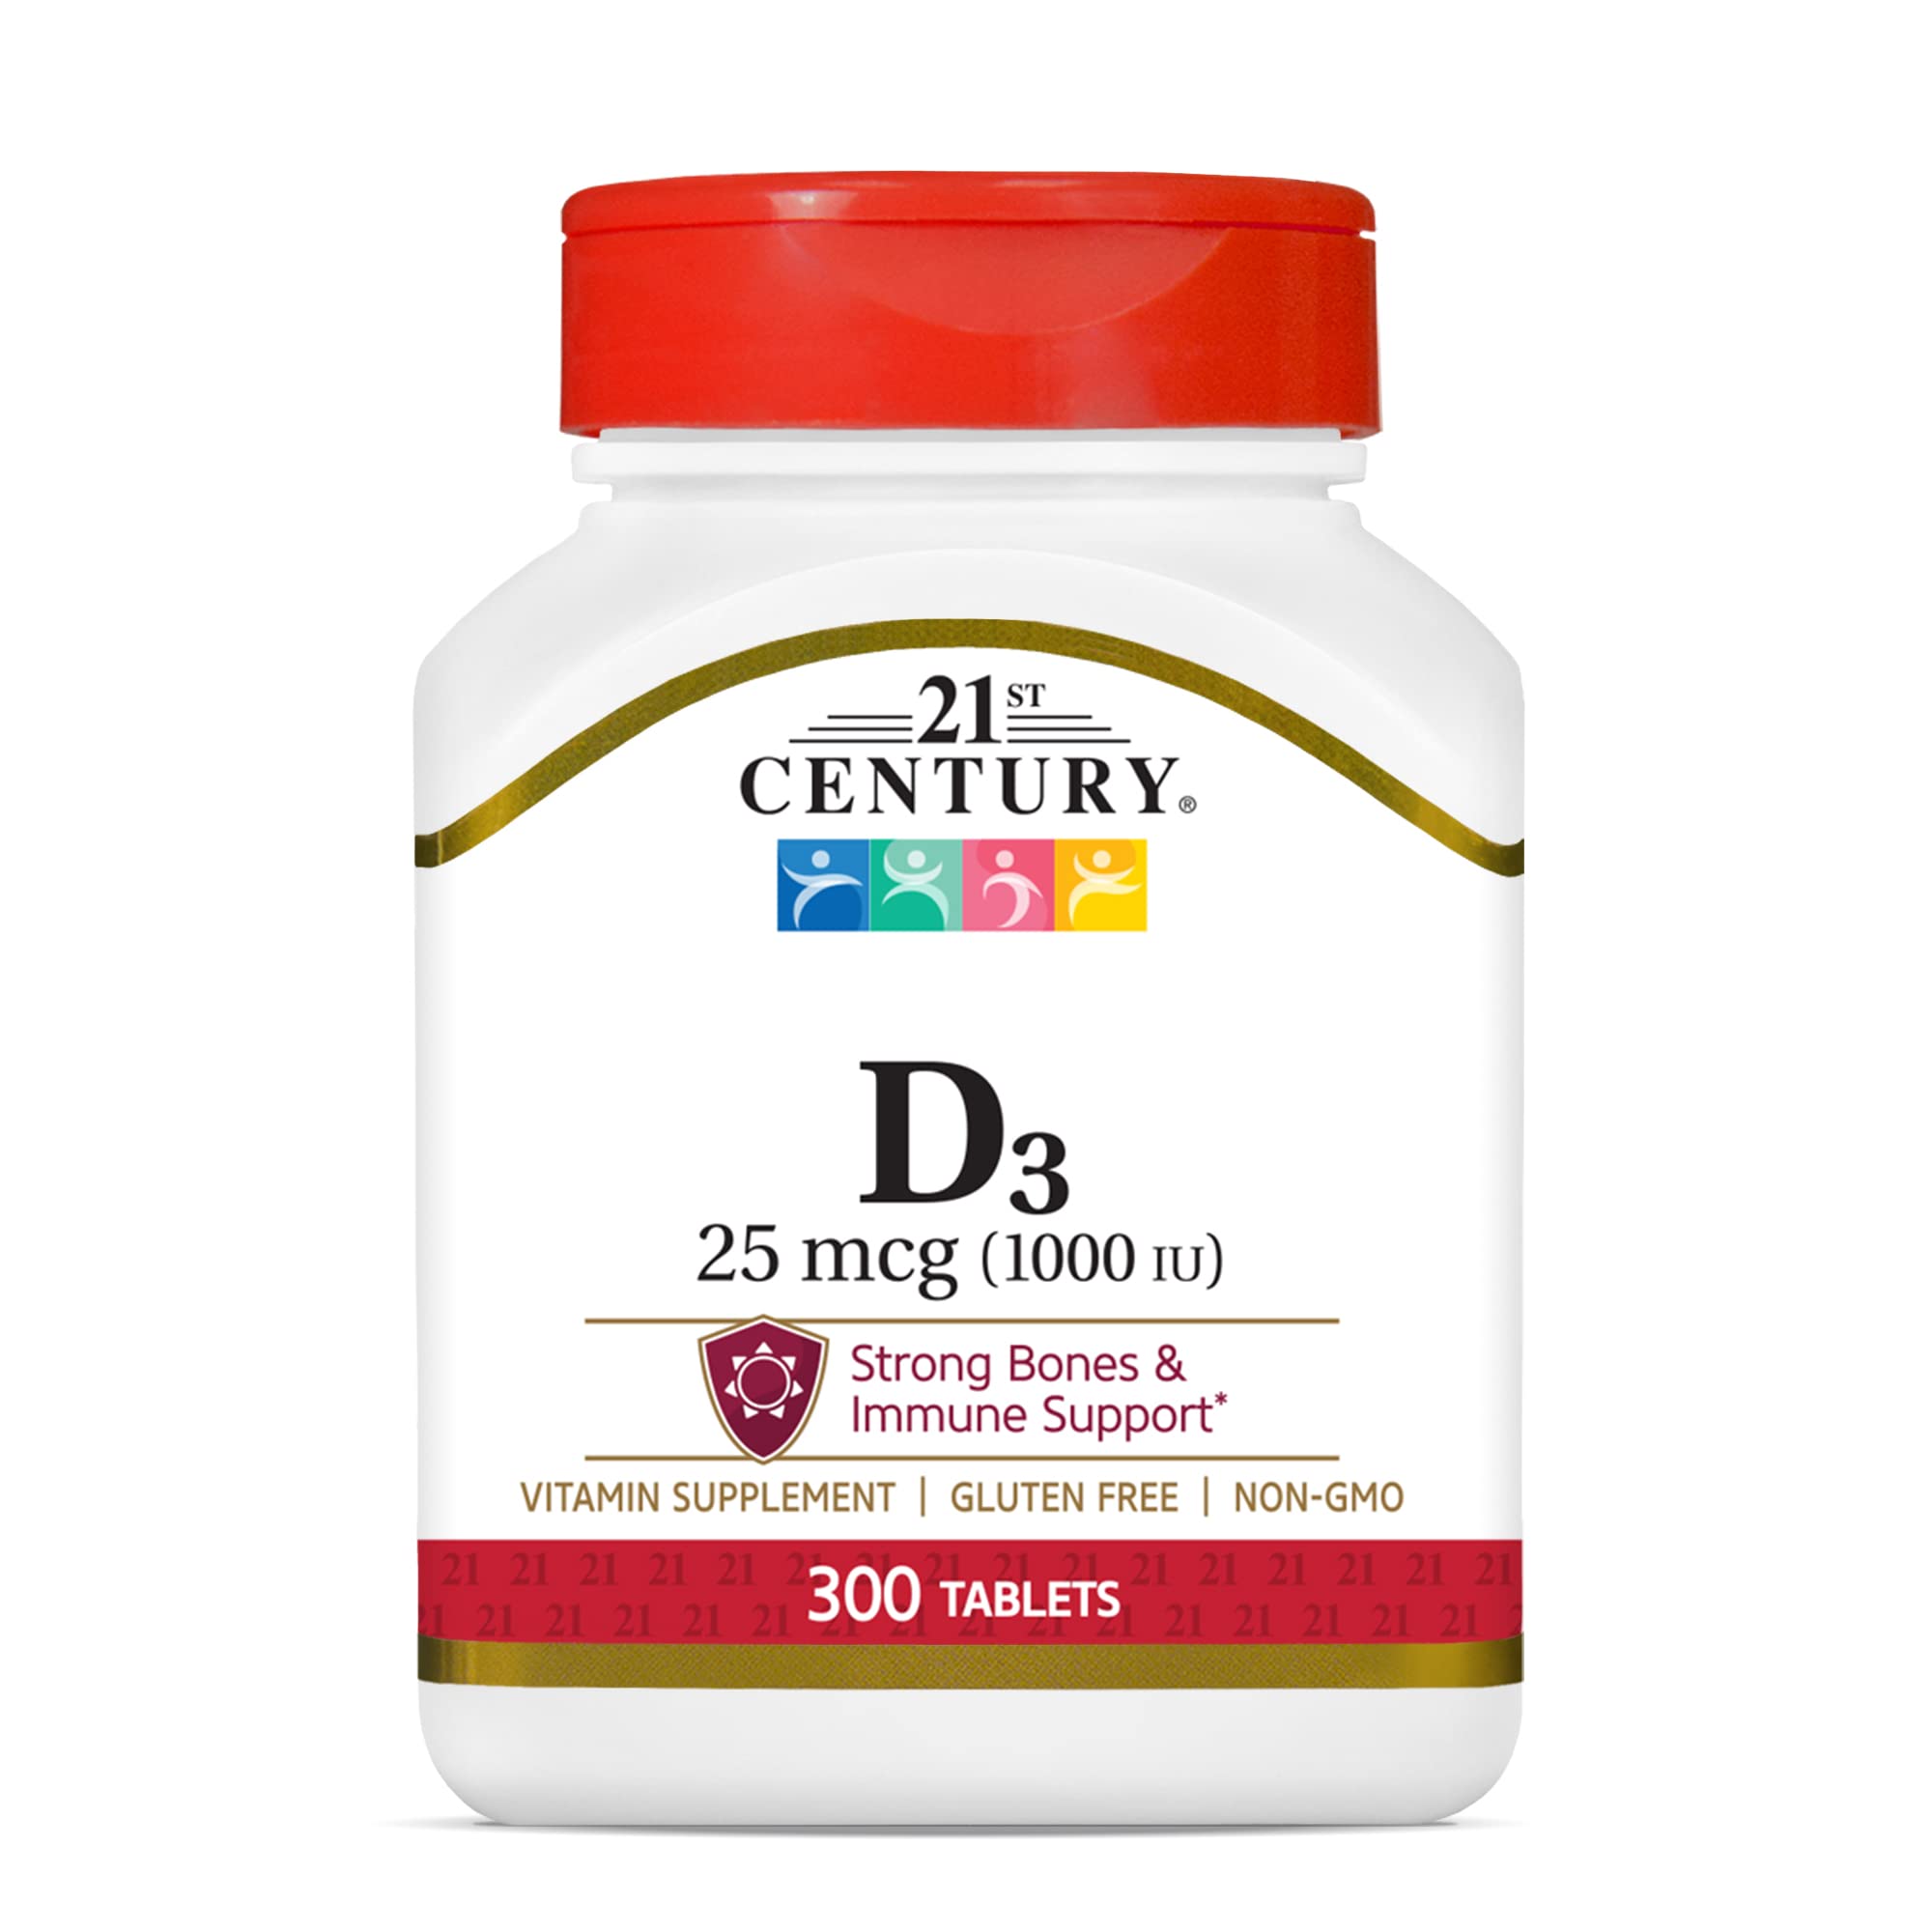 21st Century D 1000 IU Tablets, 300 Count